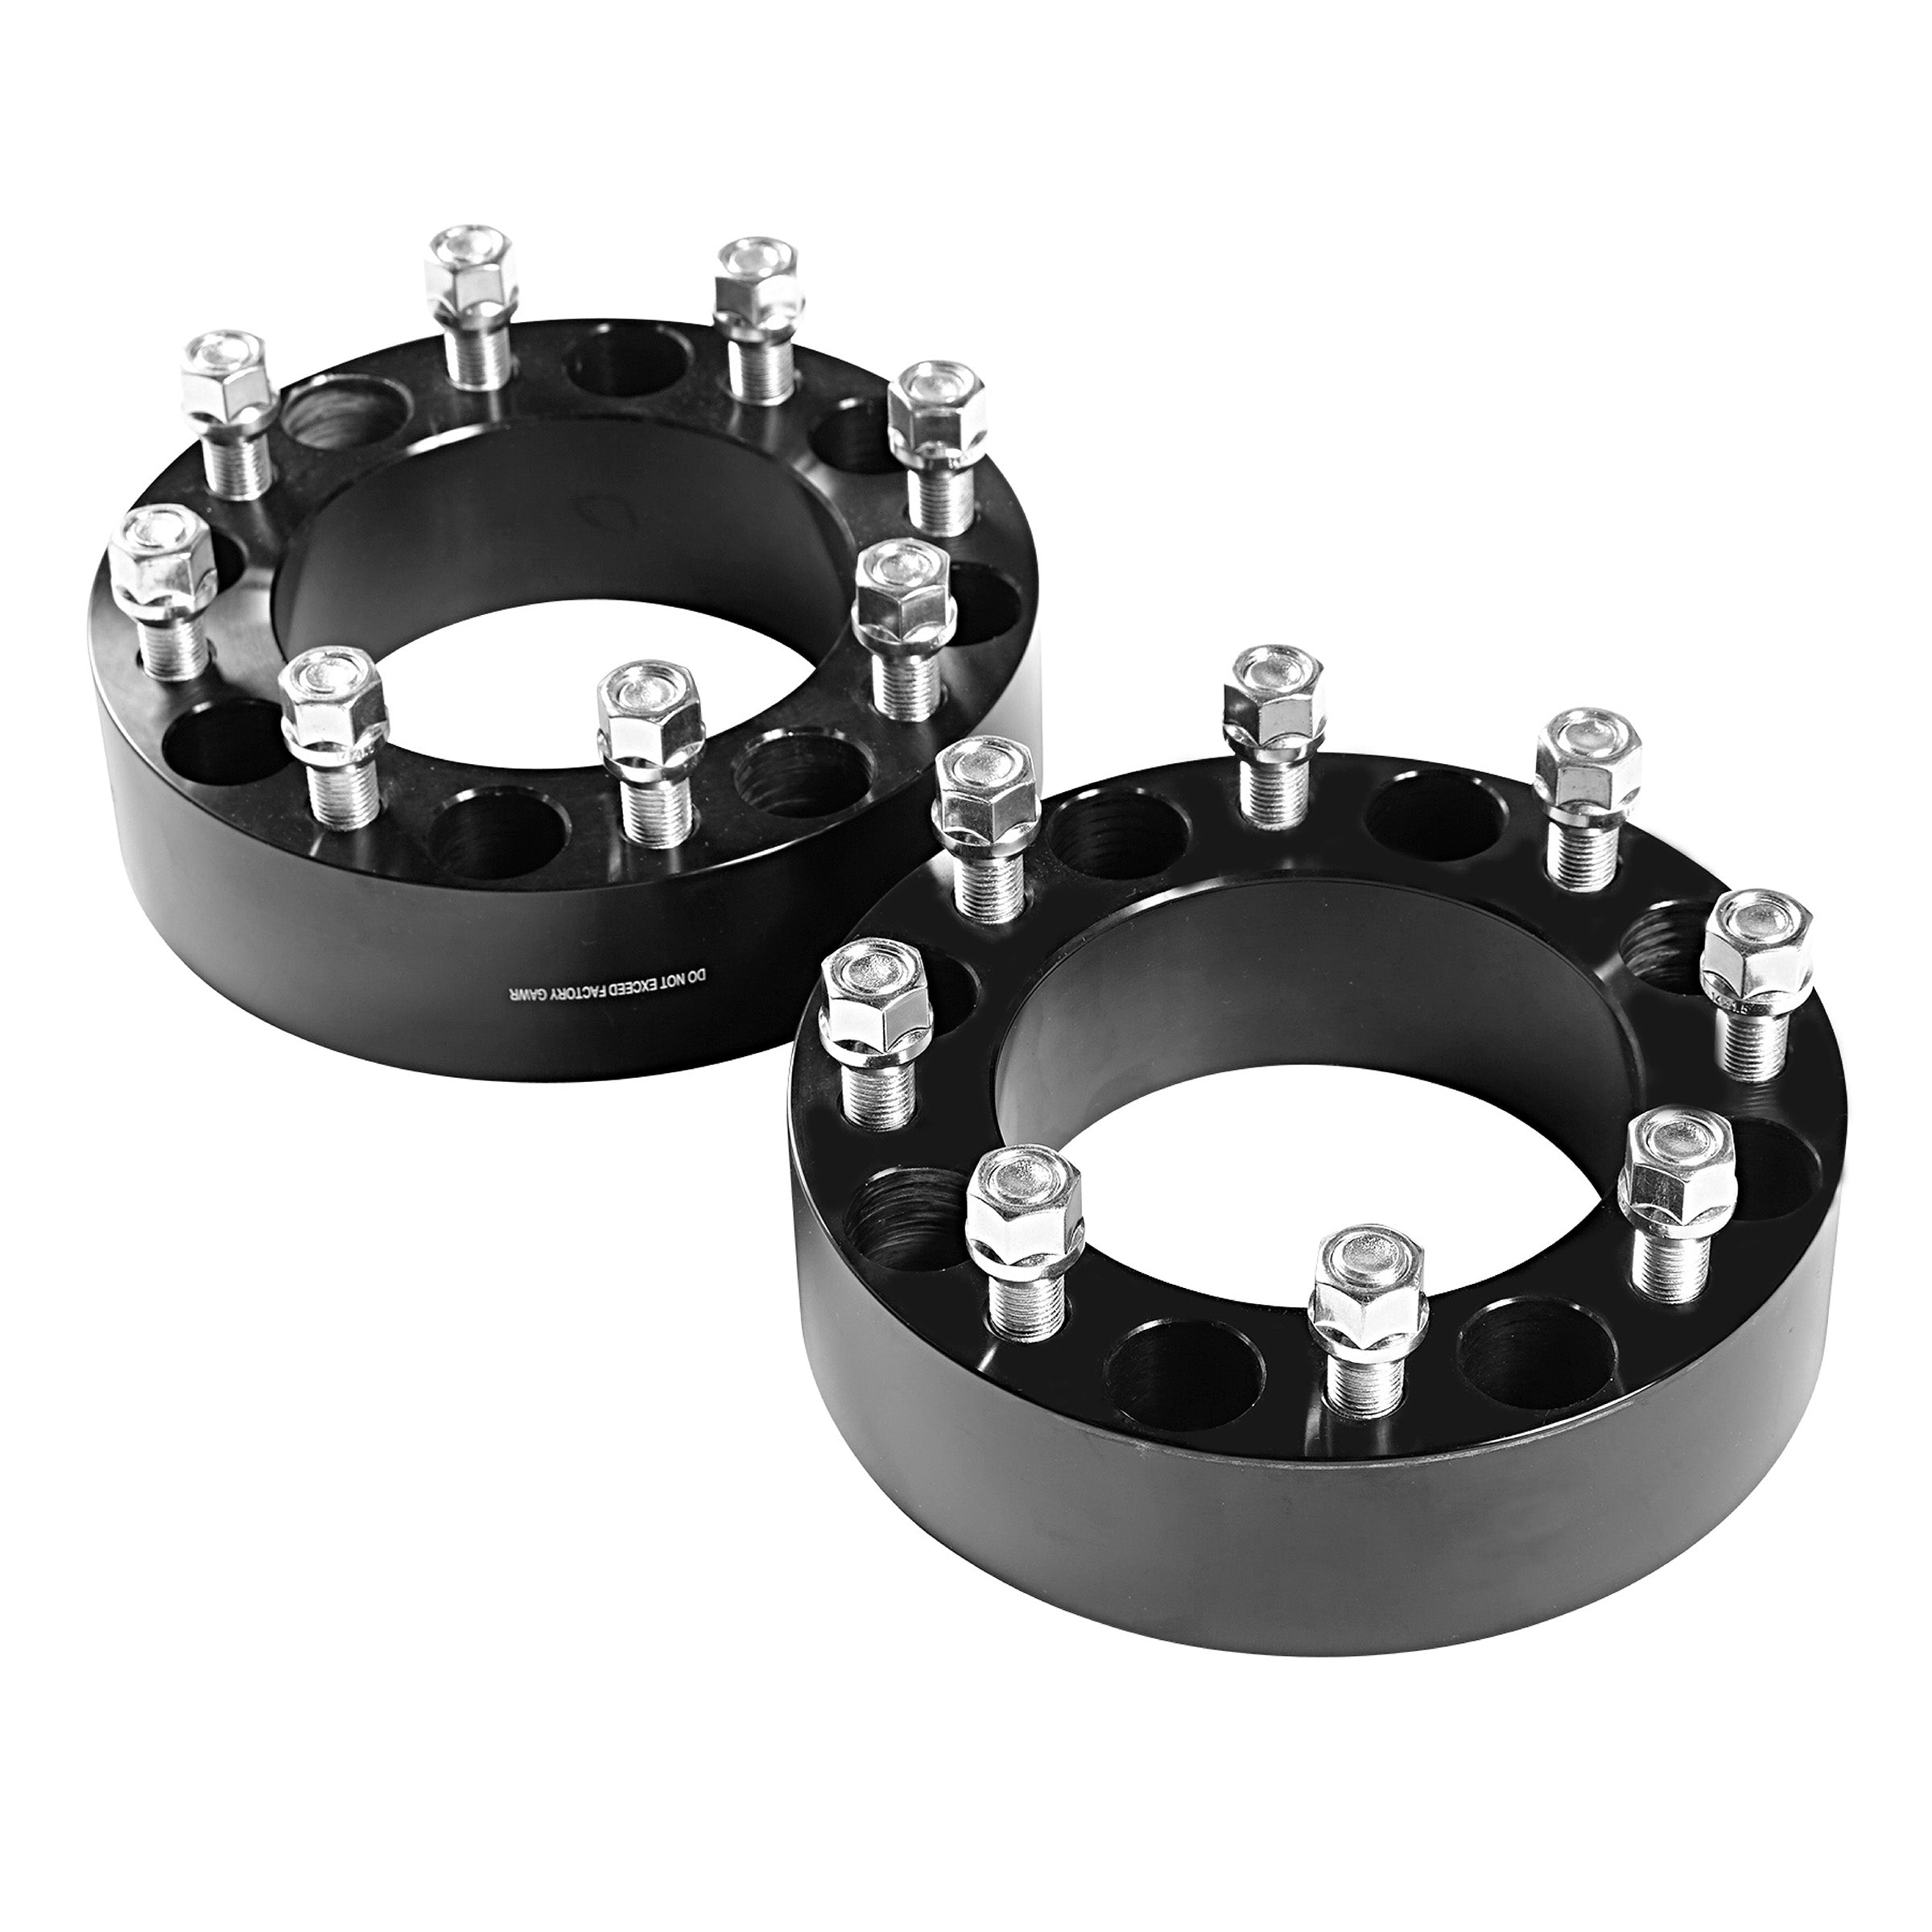 8 lug wheel spacer 2 inches 8x170 mm Ford bolt pattern